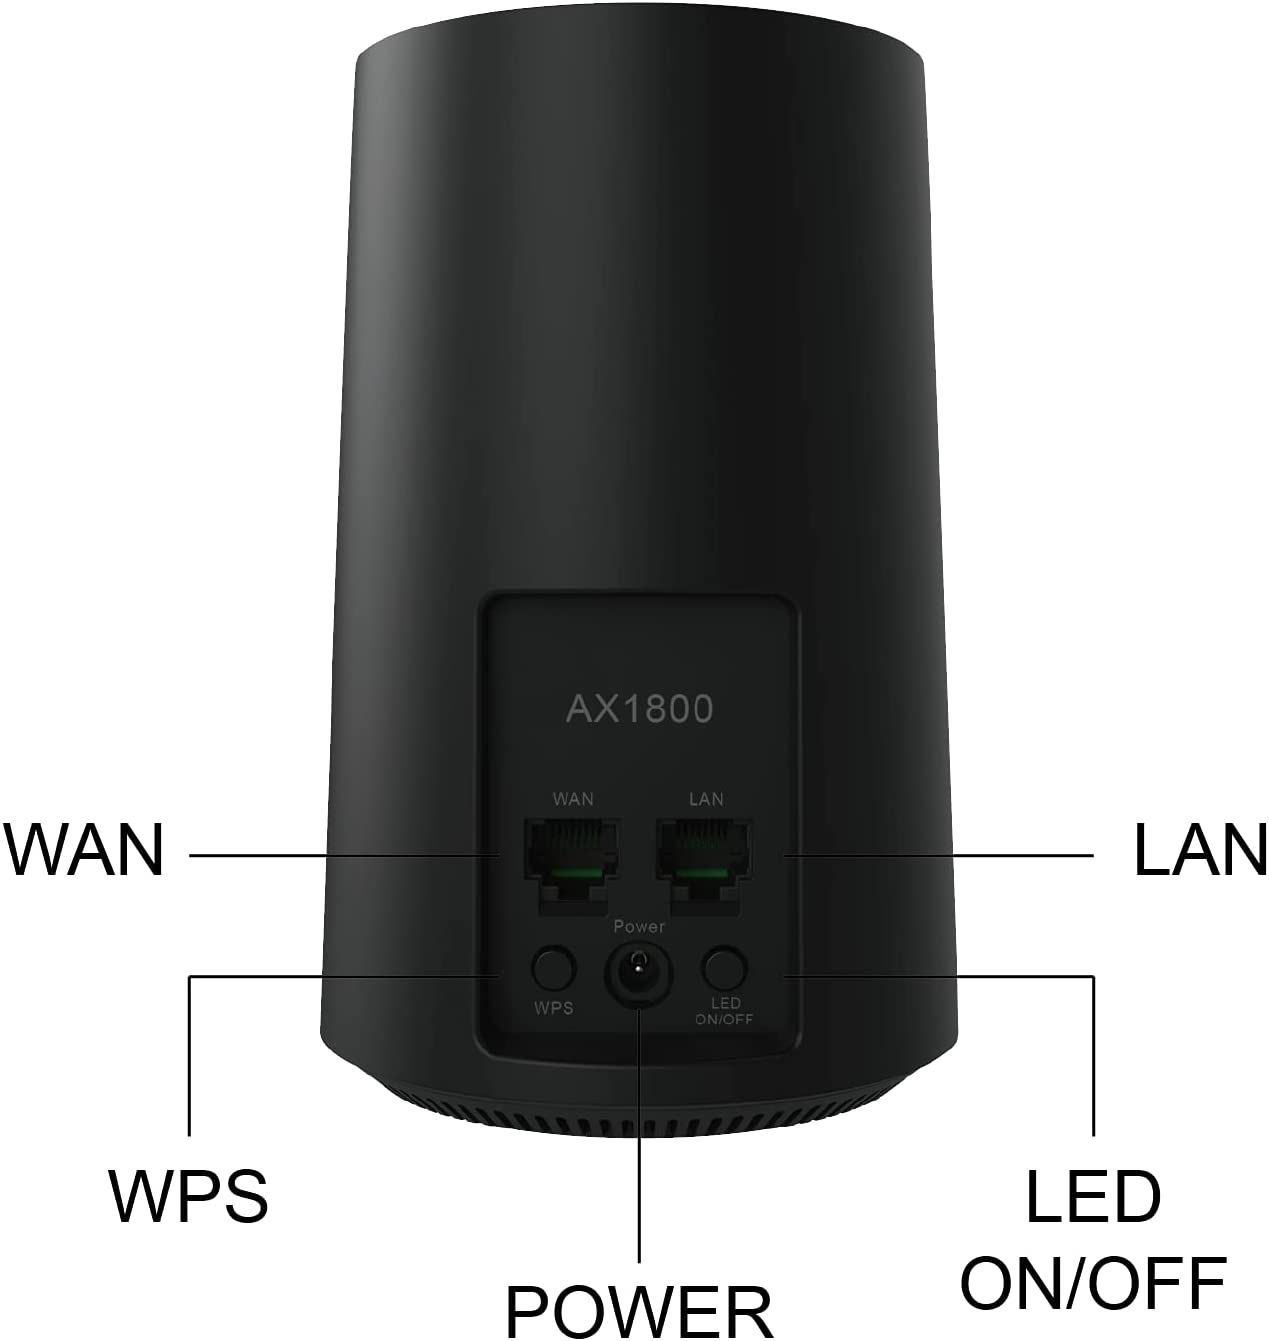 AX1800 Smart WiFi 6 Router Dual Band Wireless Router, MU-MIMO Super Fast Wireless Router